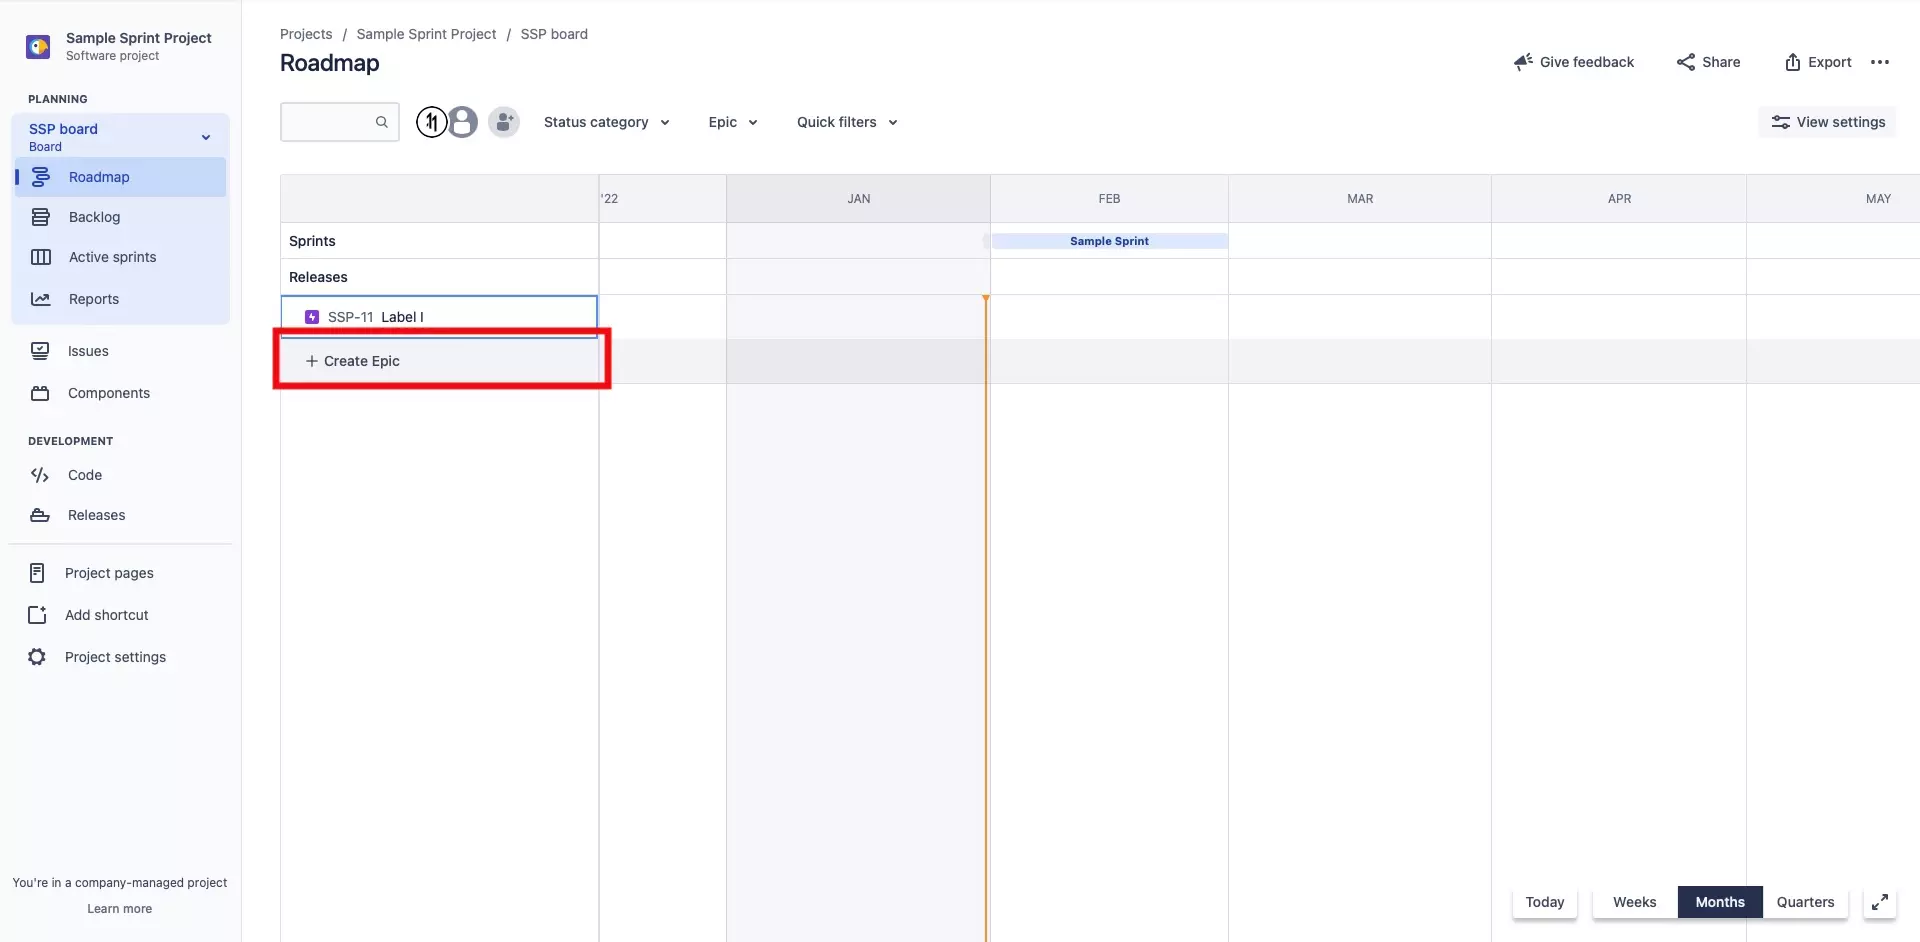 On the JIRA Roadmap screen, if you want to create a new epic, you can press the "+ Create Epic" button that is found below the epics that already exist.